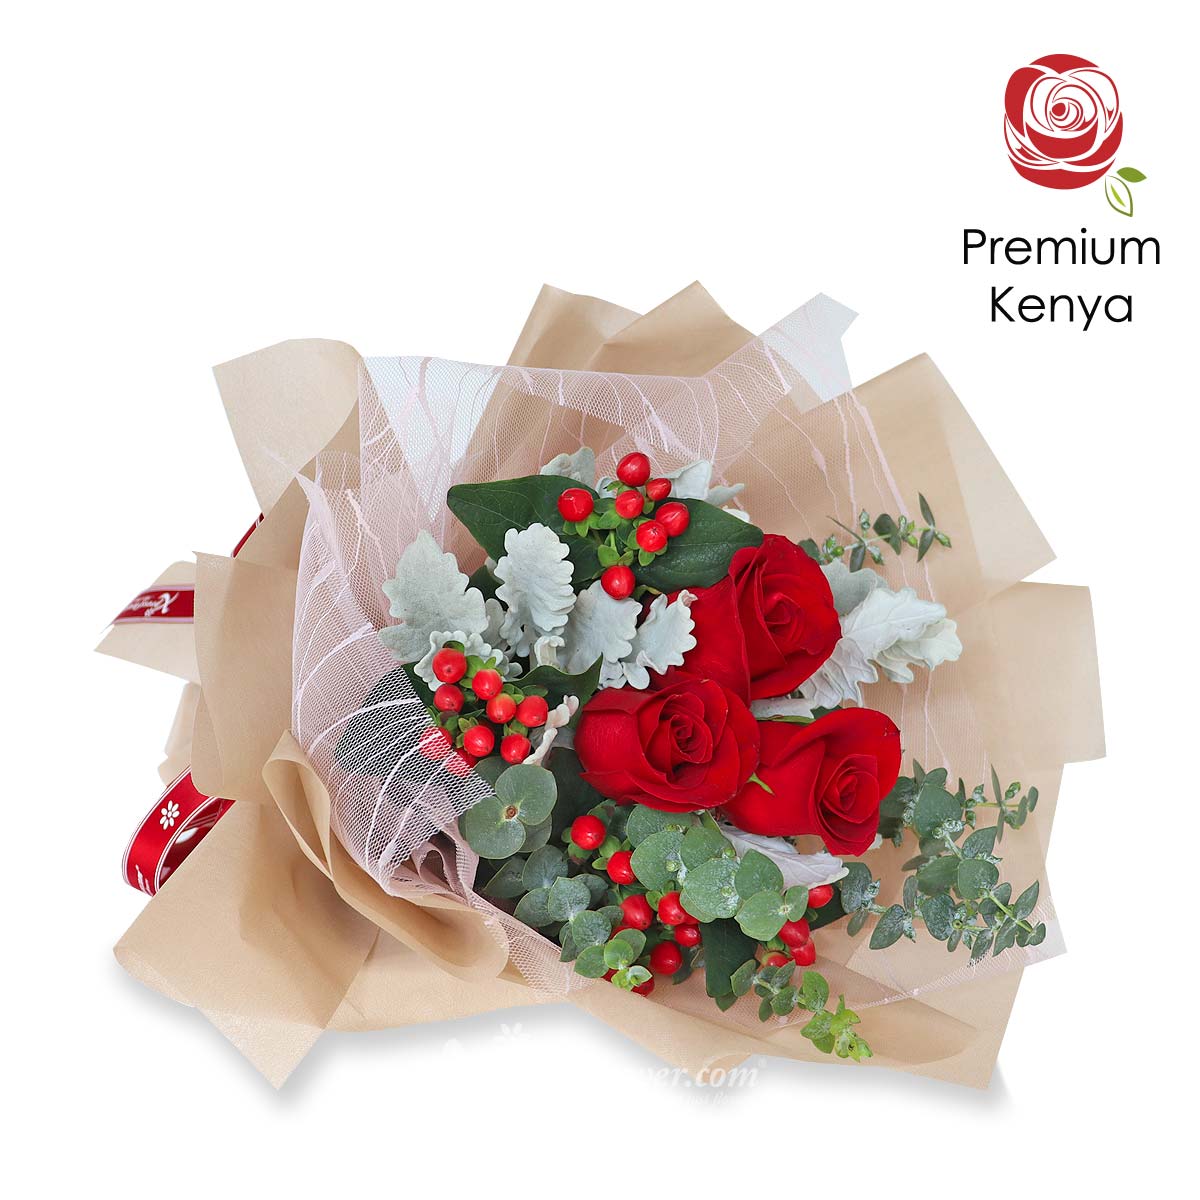 CH2107 All Day Sweetness 3 Kenya Red Roses with 24 Ferrero Rocher Chocolate 1b